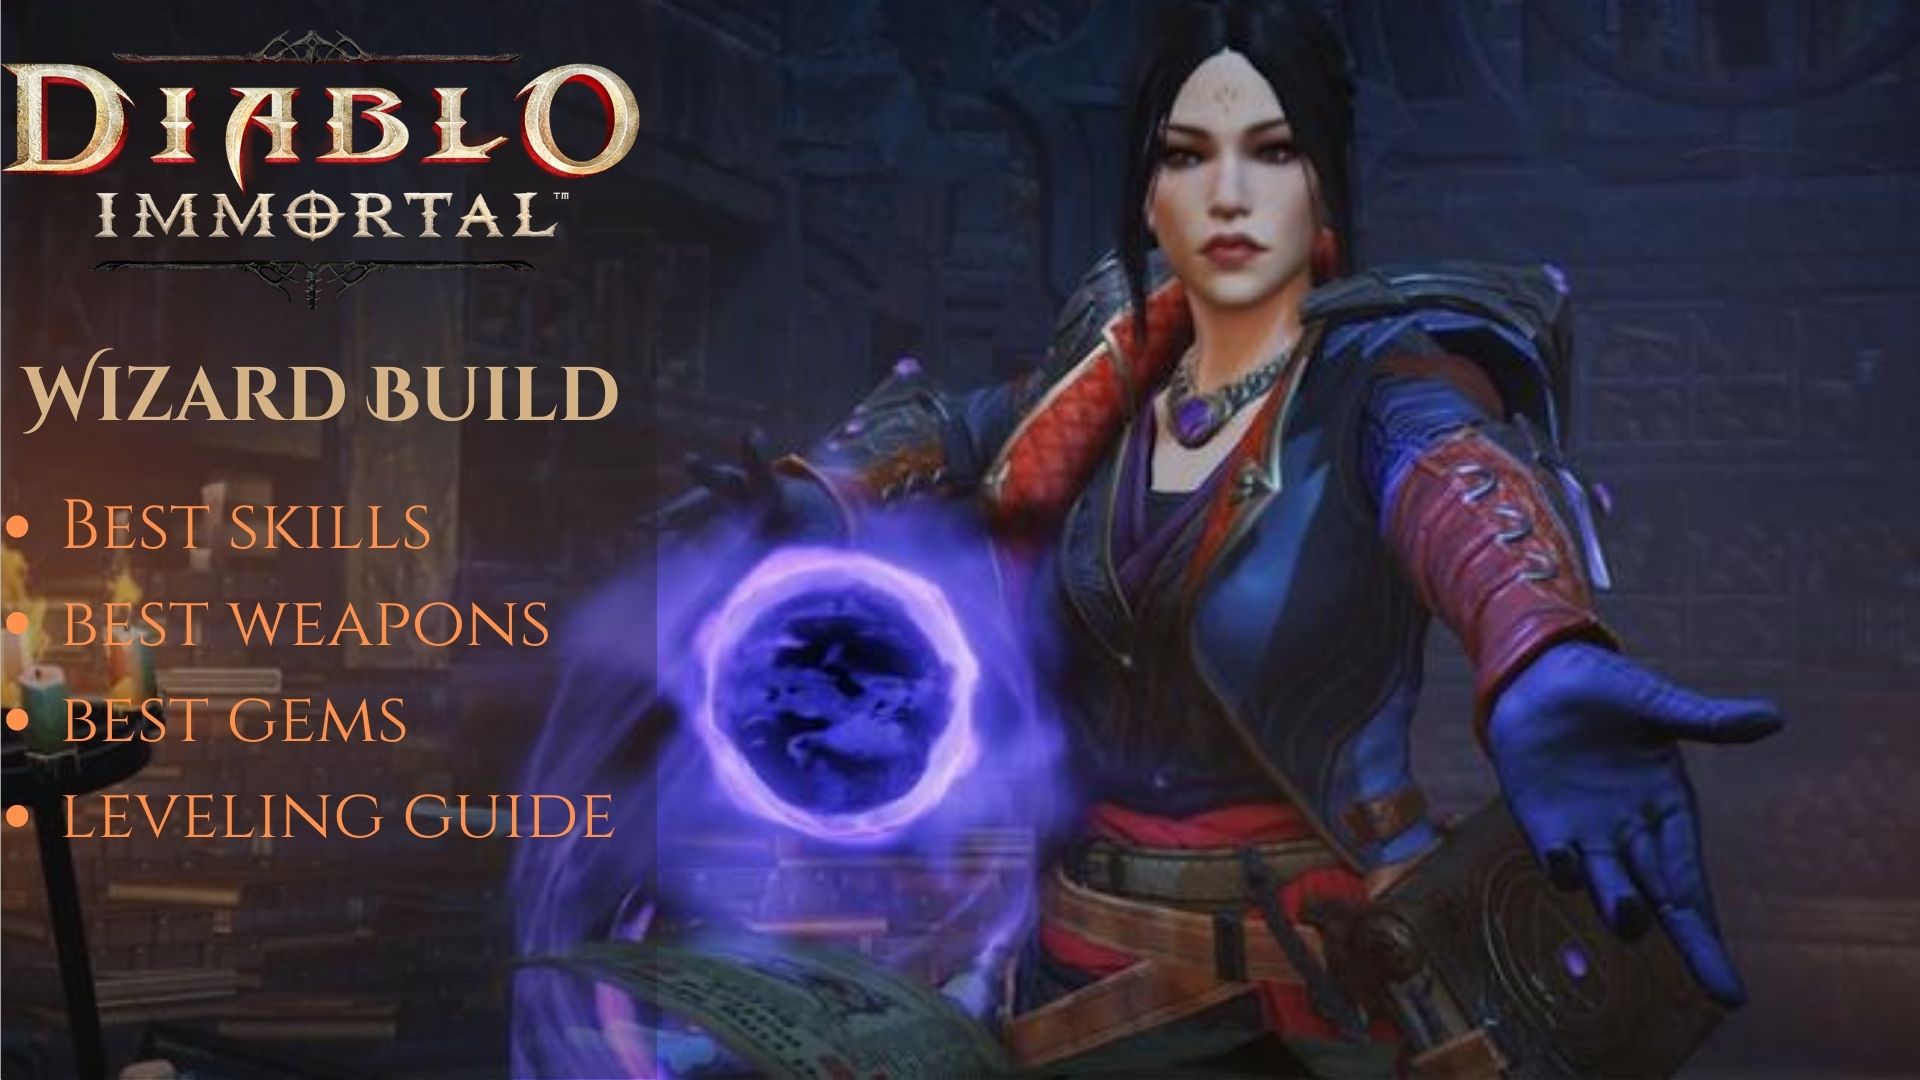 Wowhead's Diablo Immortal Build Tool - Select Your Character's